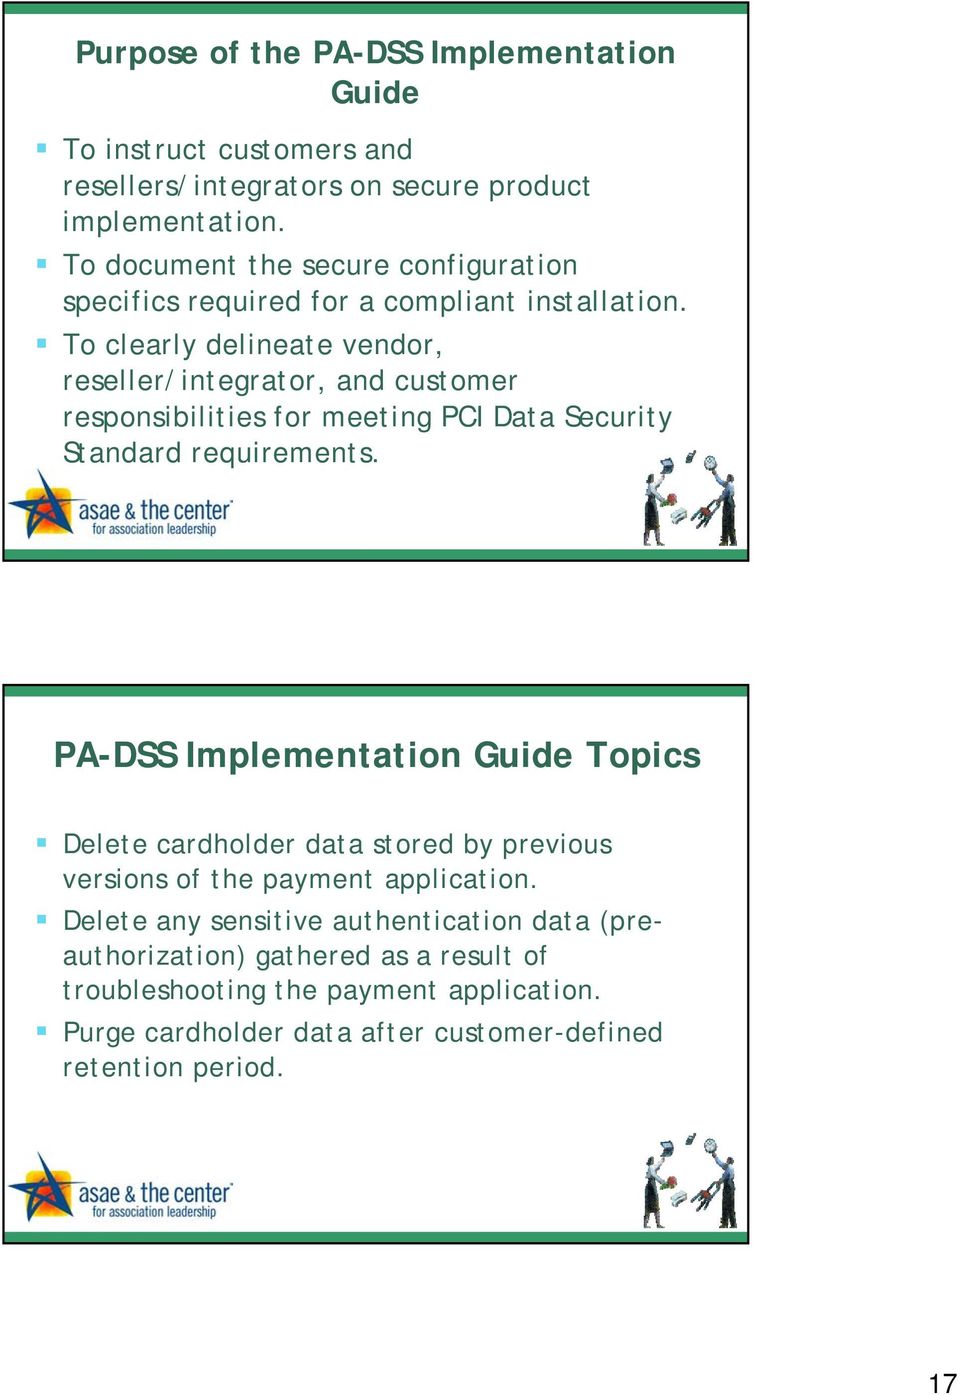 To clearly delineate vendor, reseller/integrator, and customer responsibilities for meeting PCI Data Security Standard requirements.